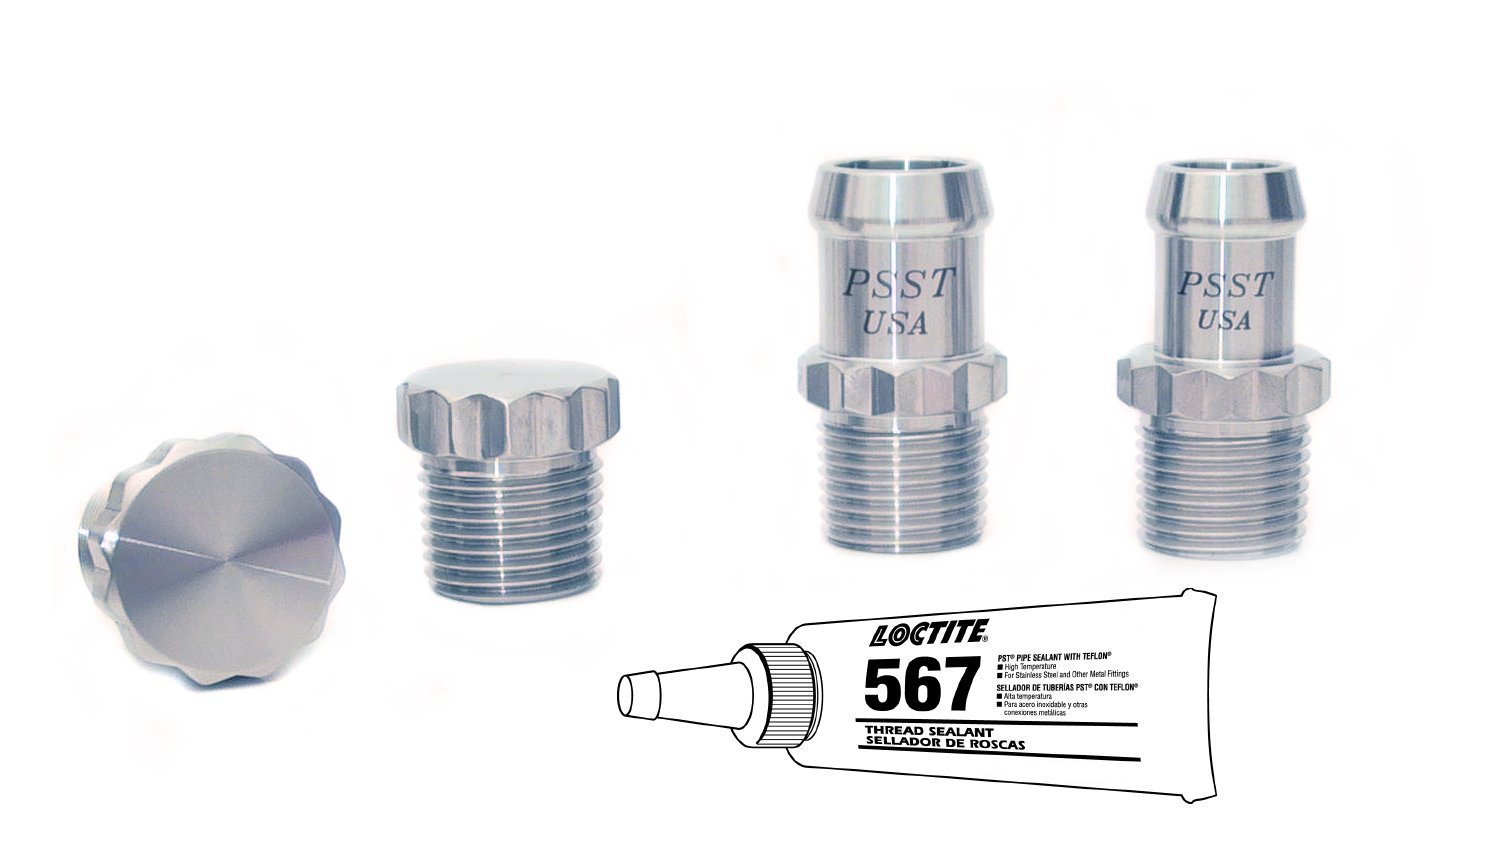 Koolkitz Fitting Kit Includes: (1) 1/2 in. NPT x 5/8 in. Barb, (1) 1/2 in. NPT x 3/4 in. Barb, (2) 1/2 in. NPT Plugs [Natural]